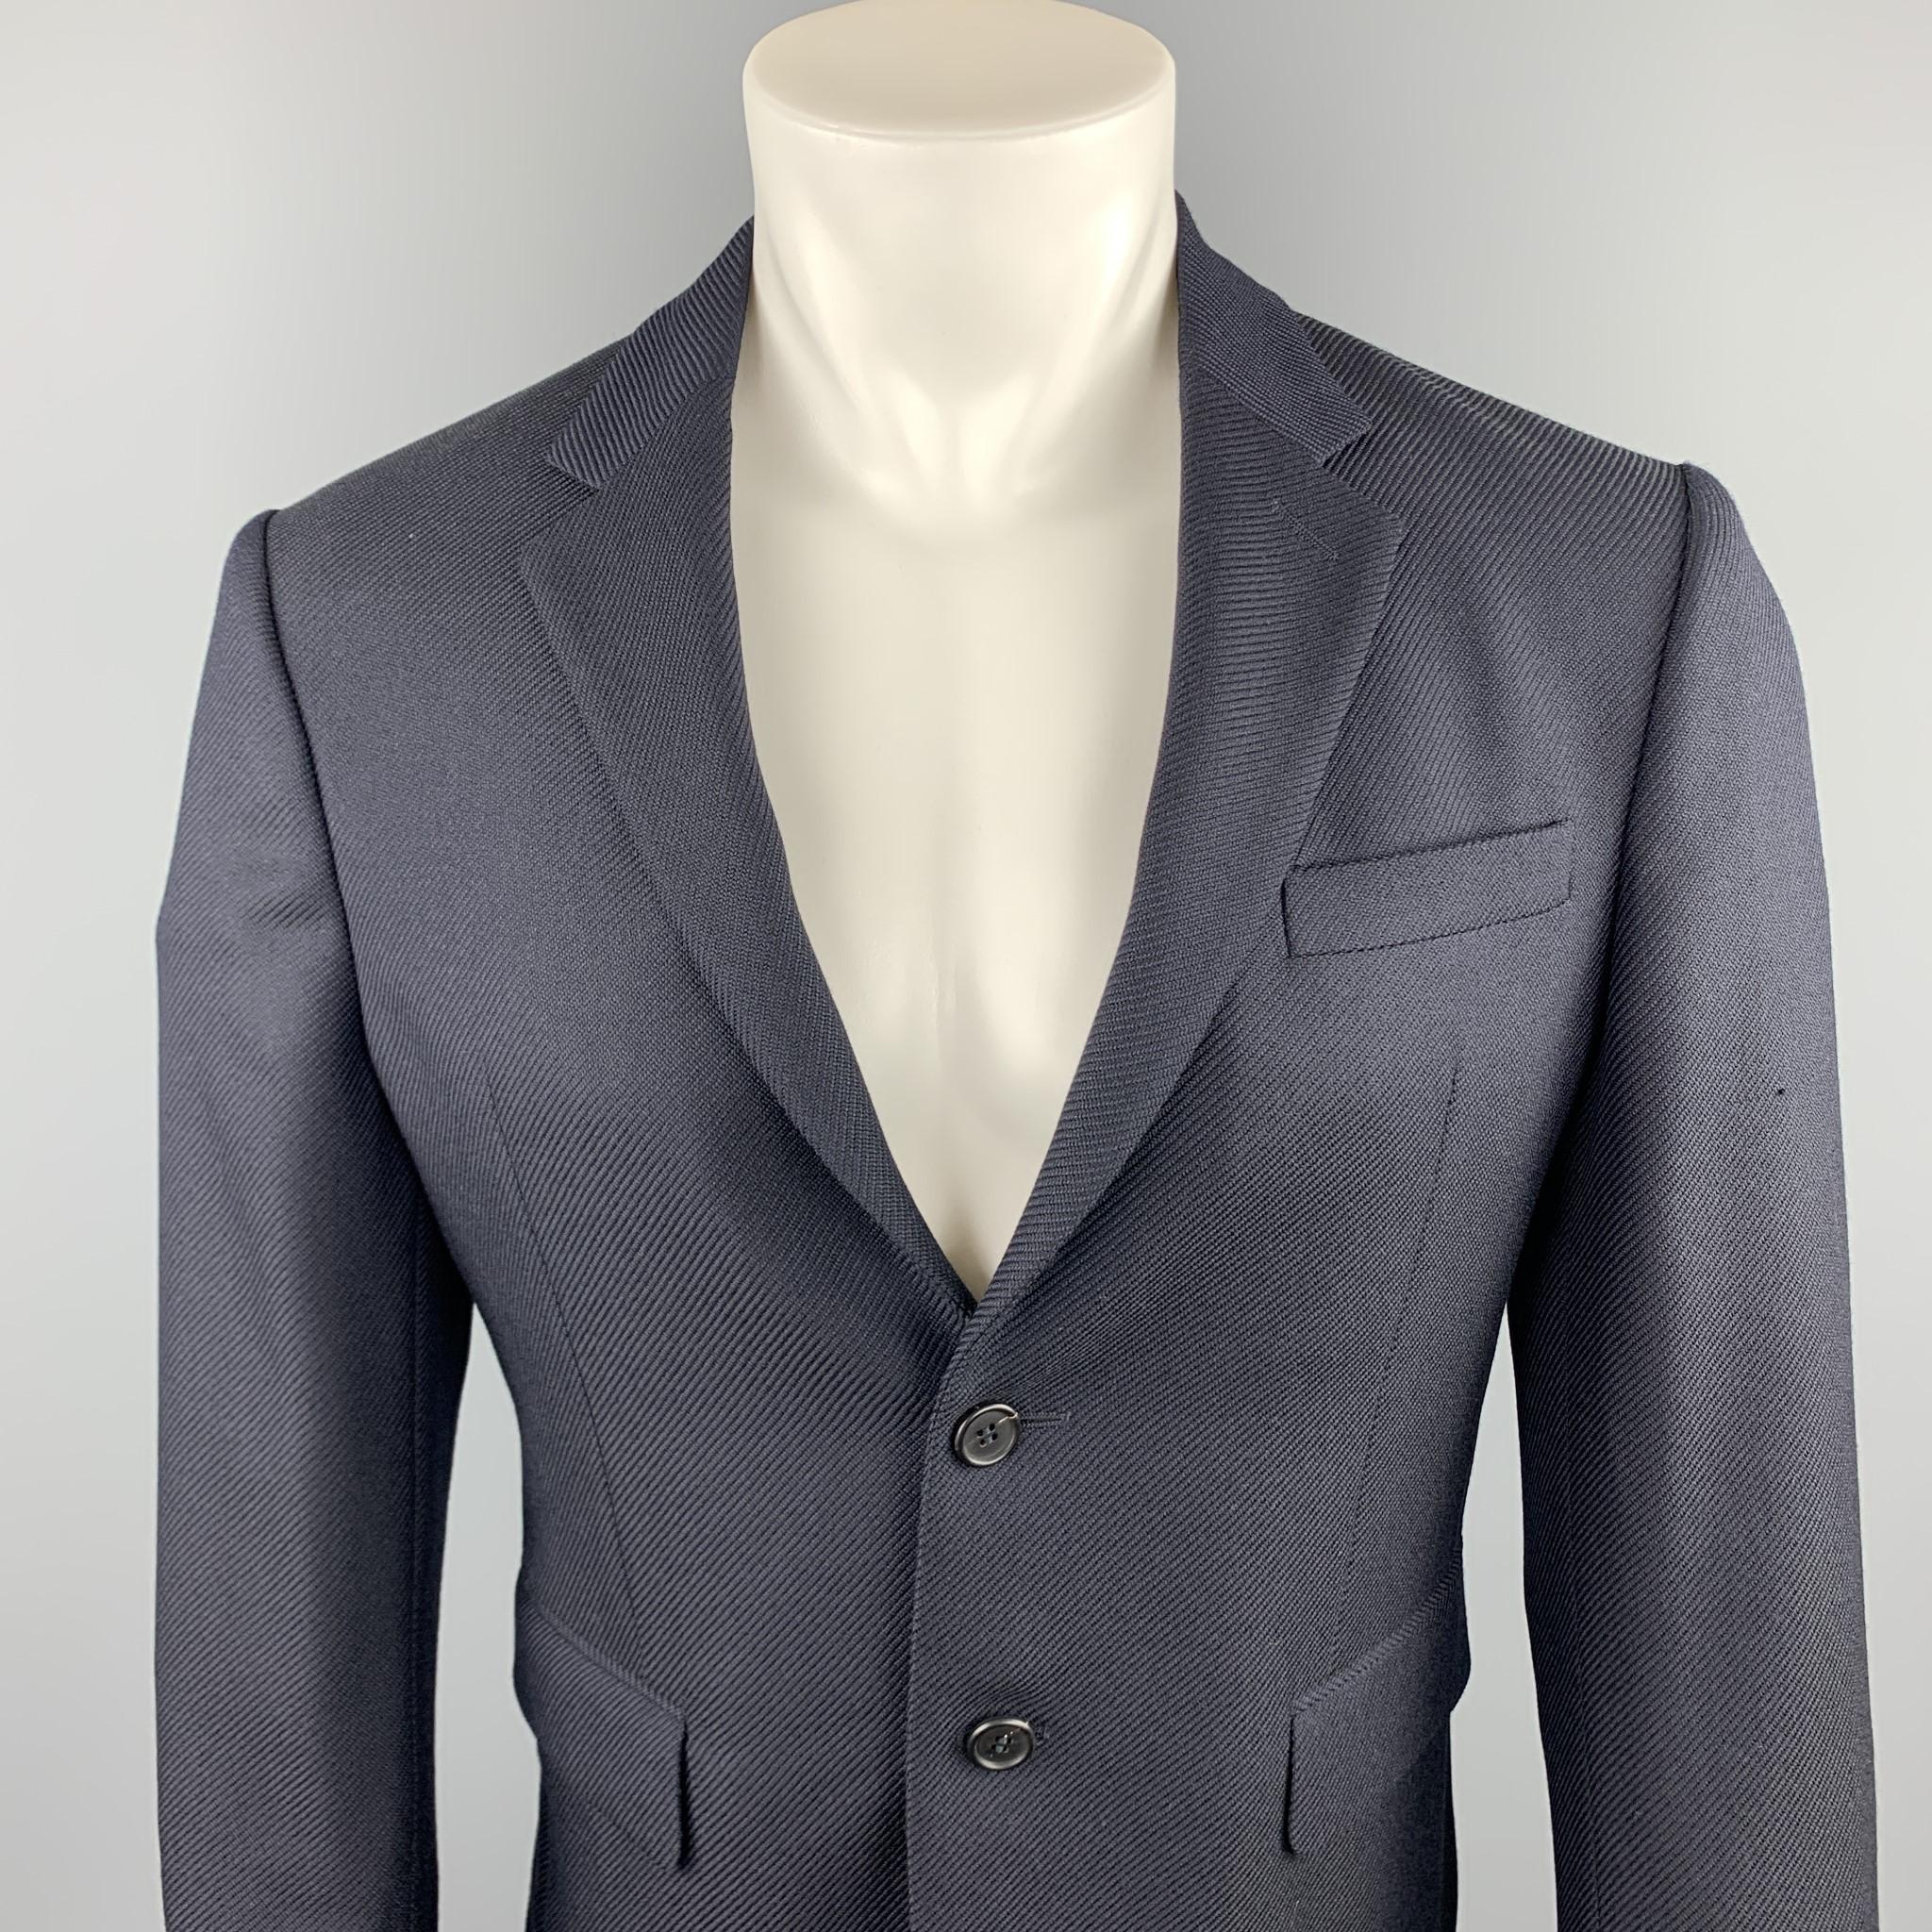 PRADA sport coat comes in a navy textured wool featuring a notch lapel style, flap pockets, and a two button closure.  Sleeves have been professionally altered / shortened.

Excellent Pre-Owned Condition.
Marked: IT 48

Measurements:

Shoulder: 16.5